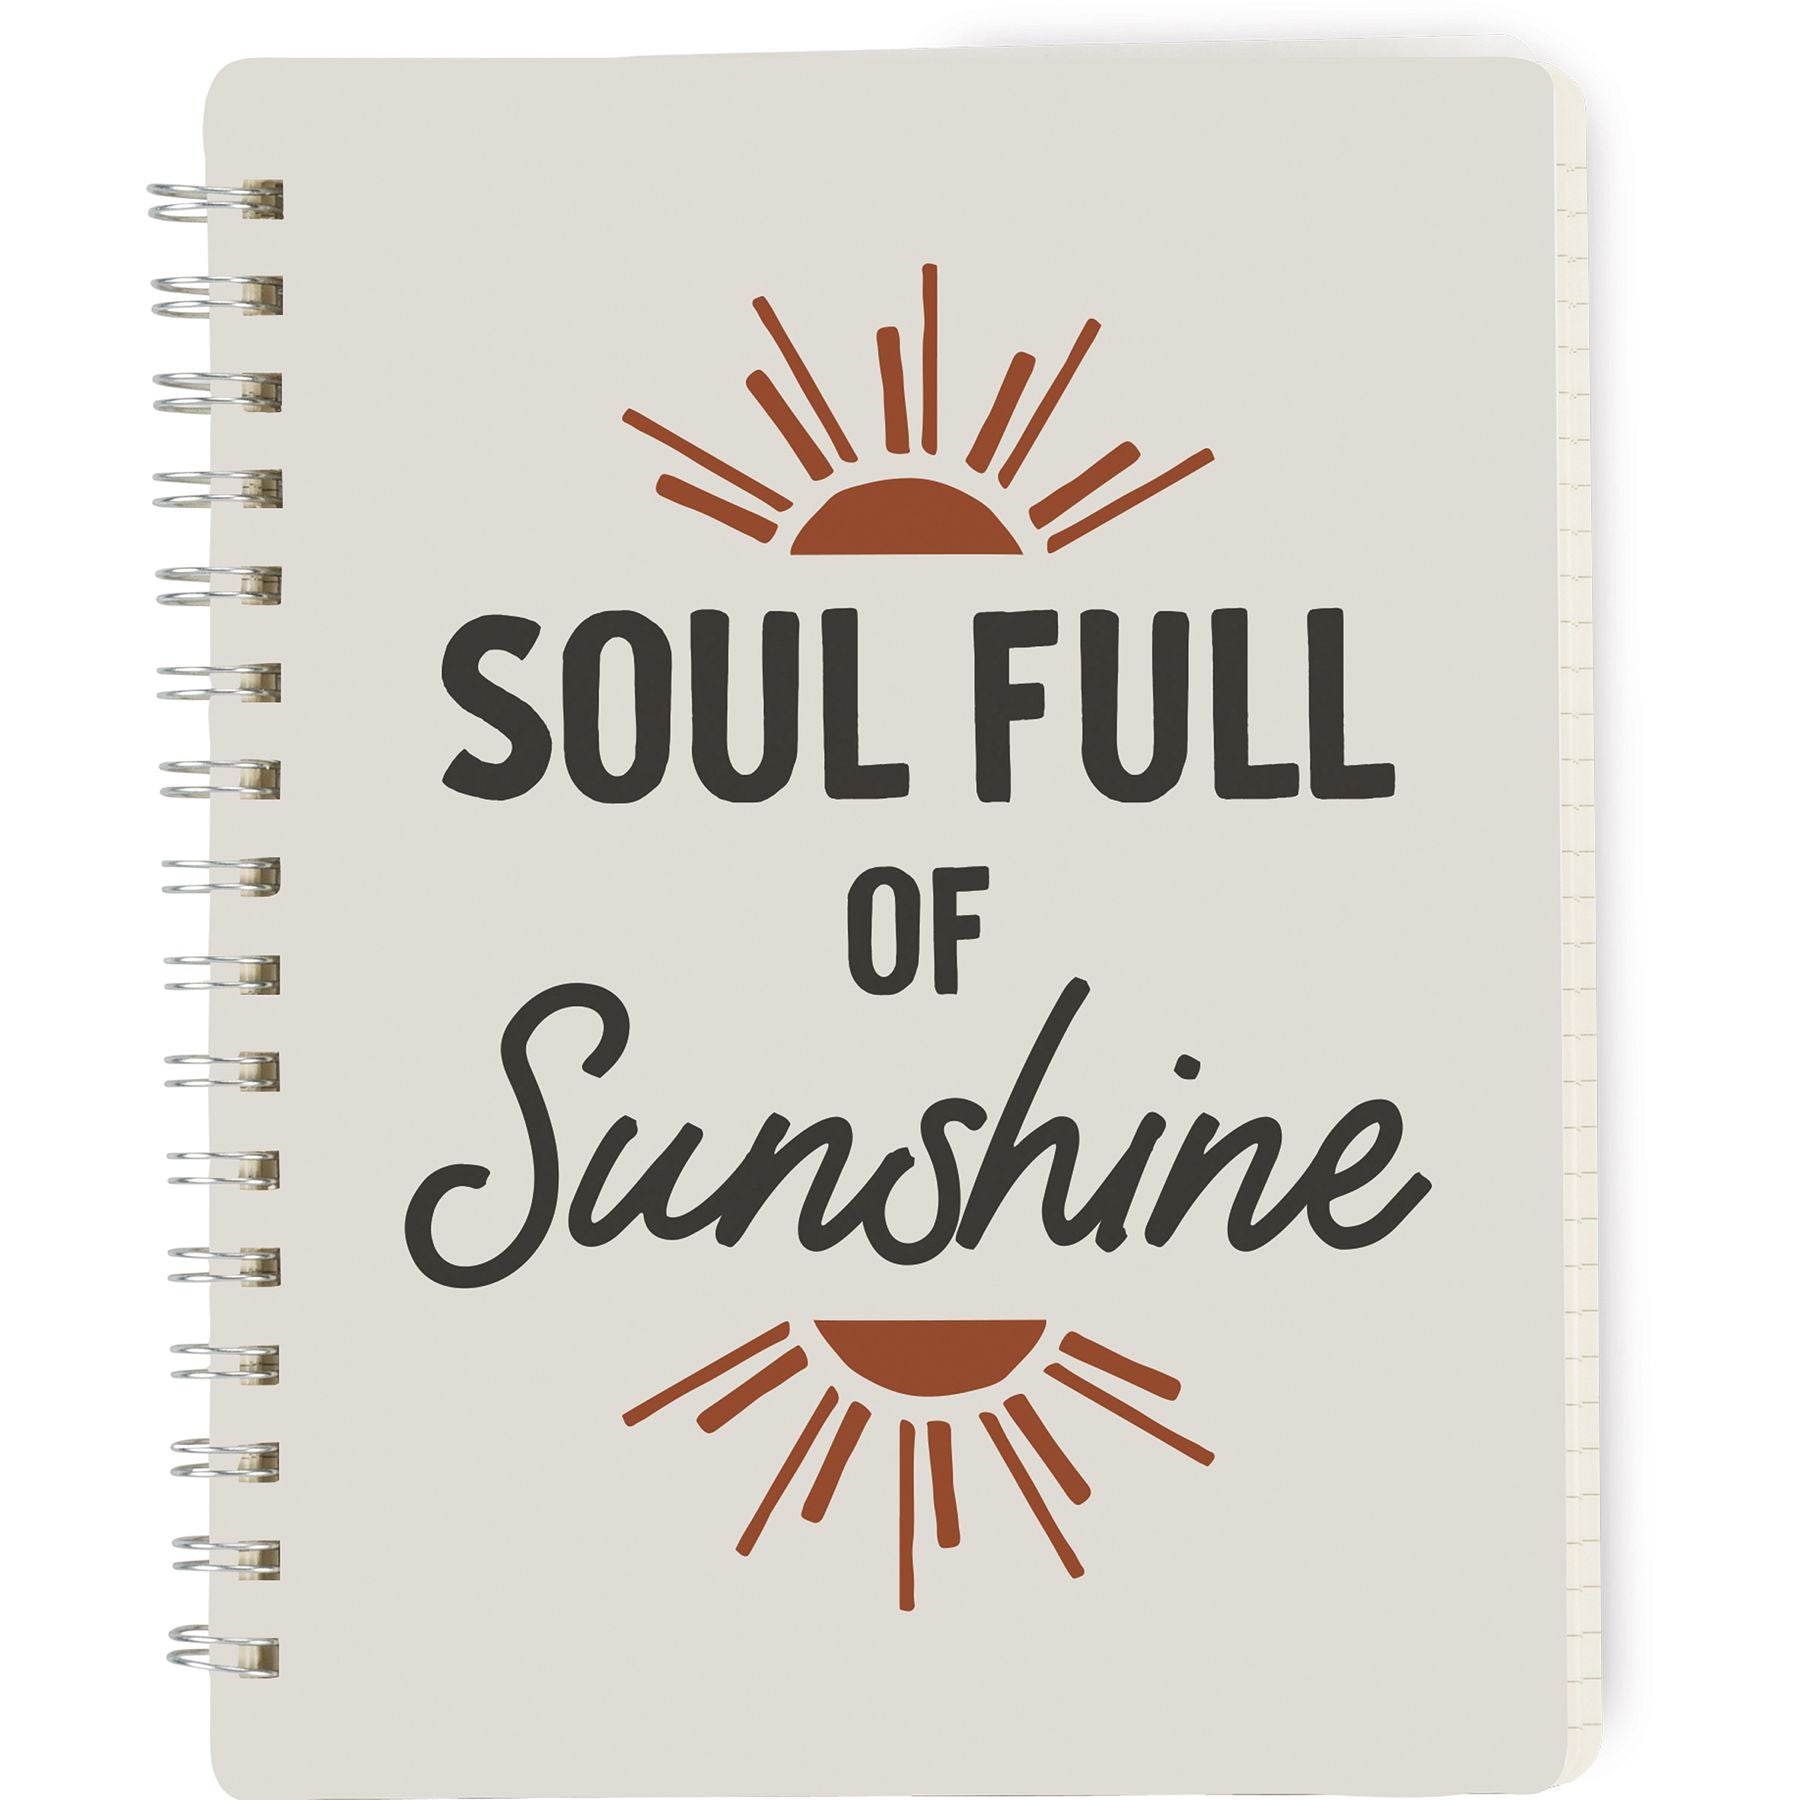 Soul Full Of Sunshine Spiral Notebook | 5.75" x 7.50" | 120 Lined Pages